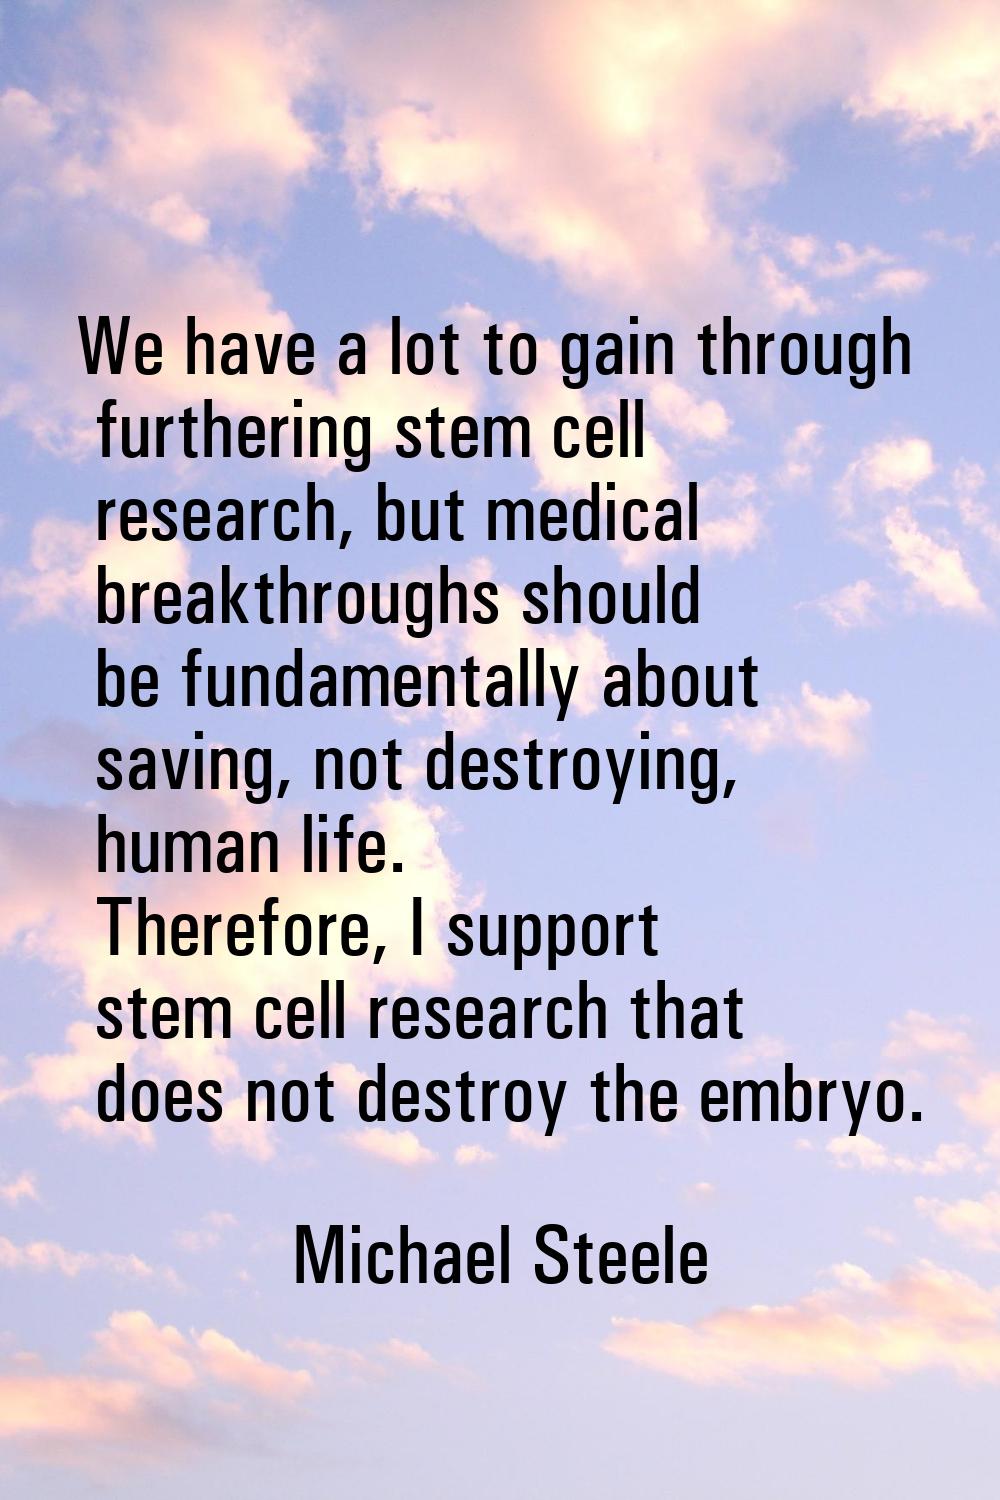 We have a lot to gain through furthering stem cell research, but medical breakthroughs should be fu